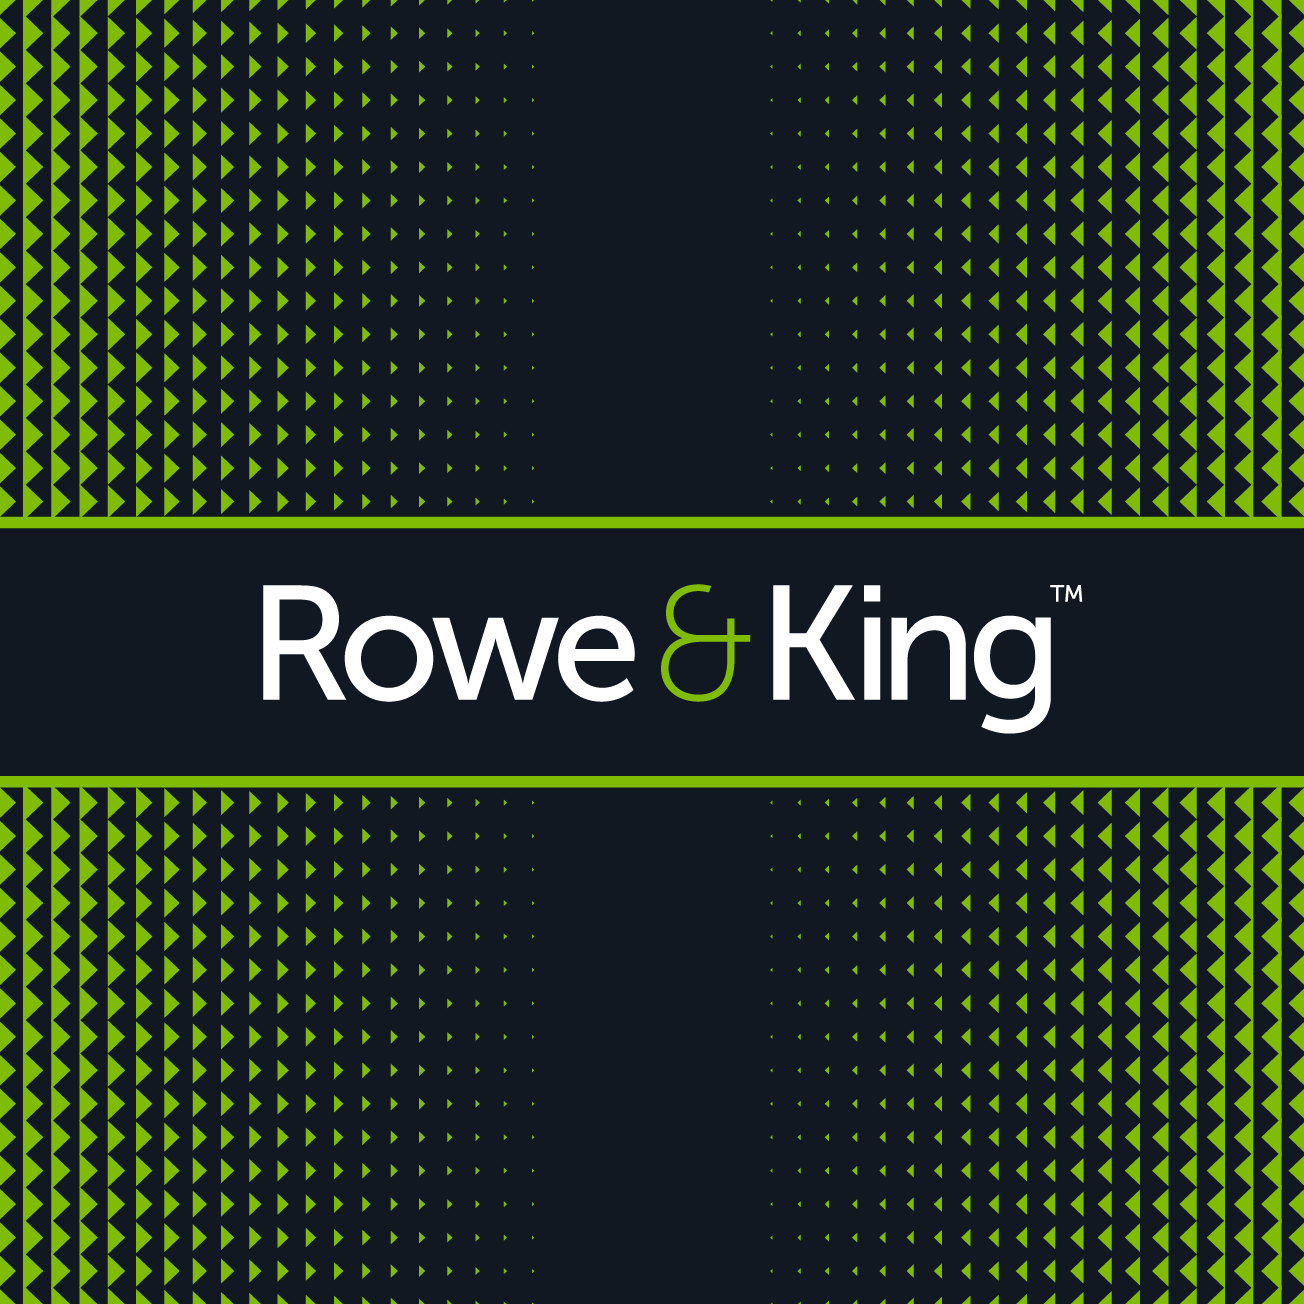 Club Image for ROWE AND KING